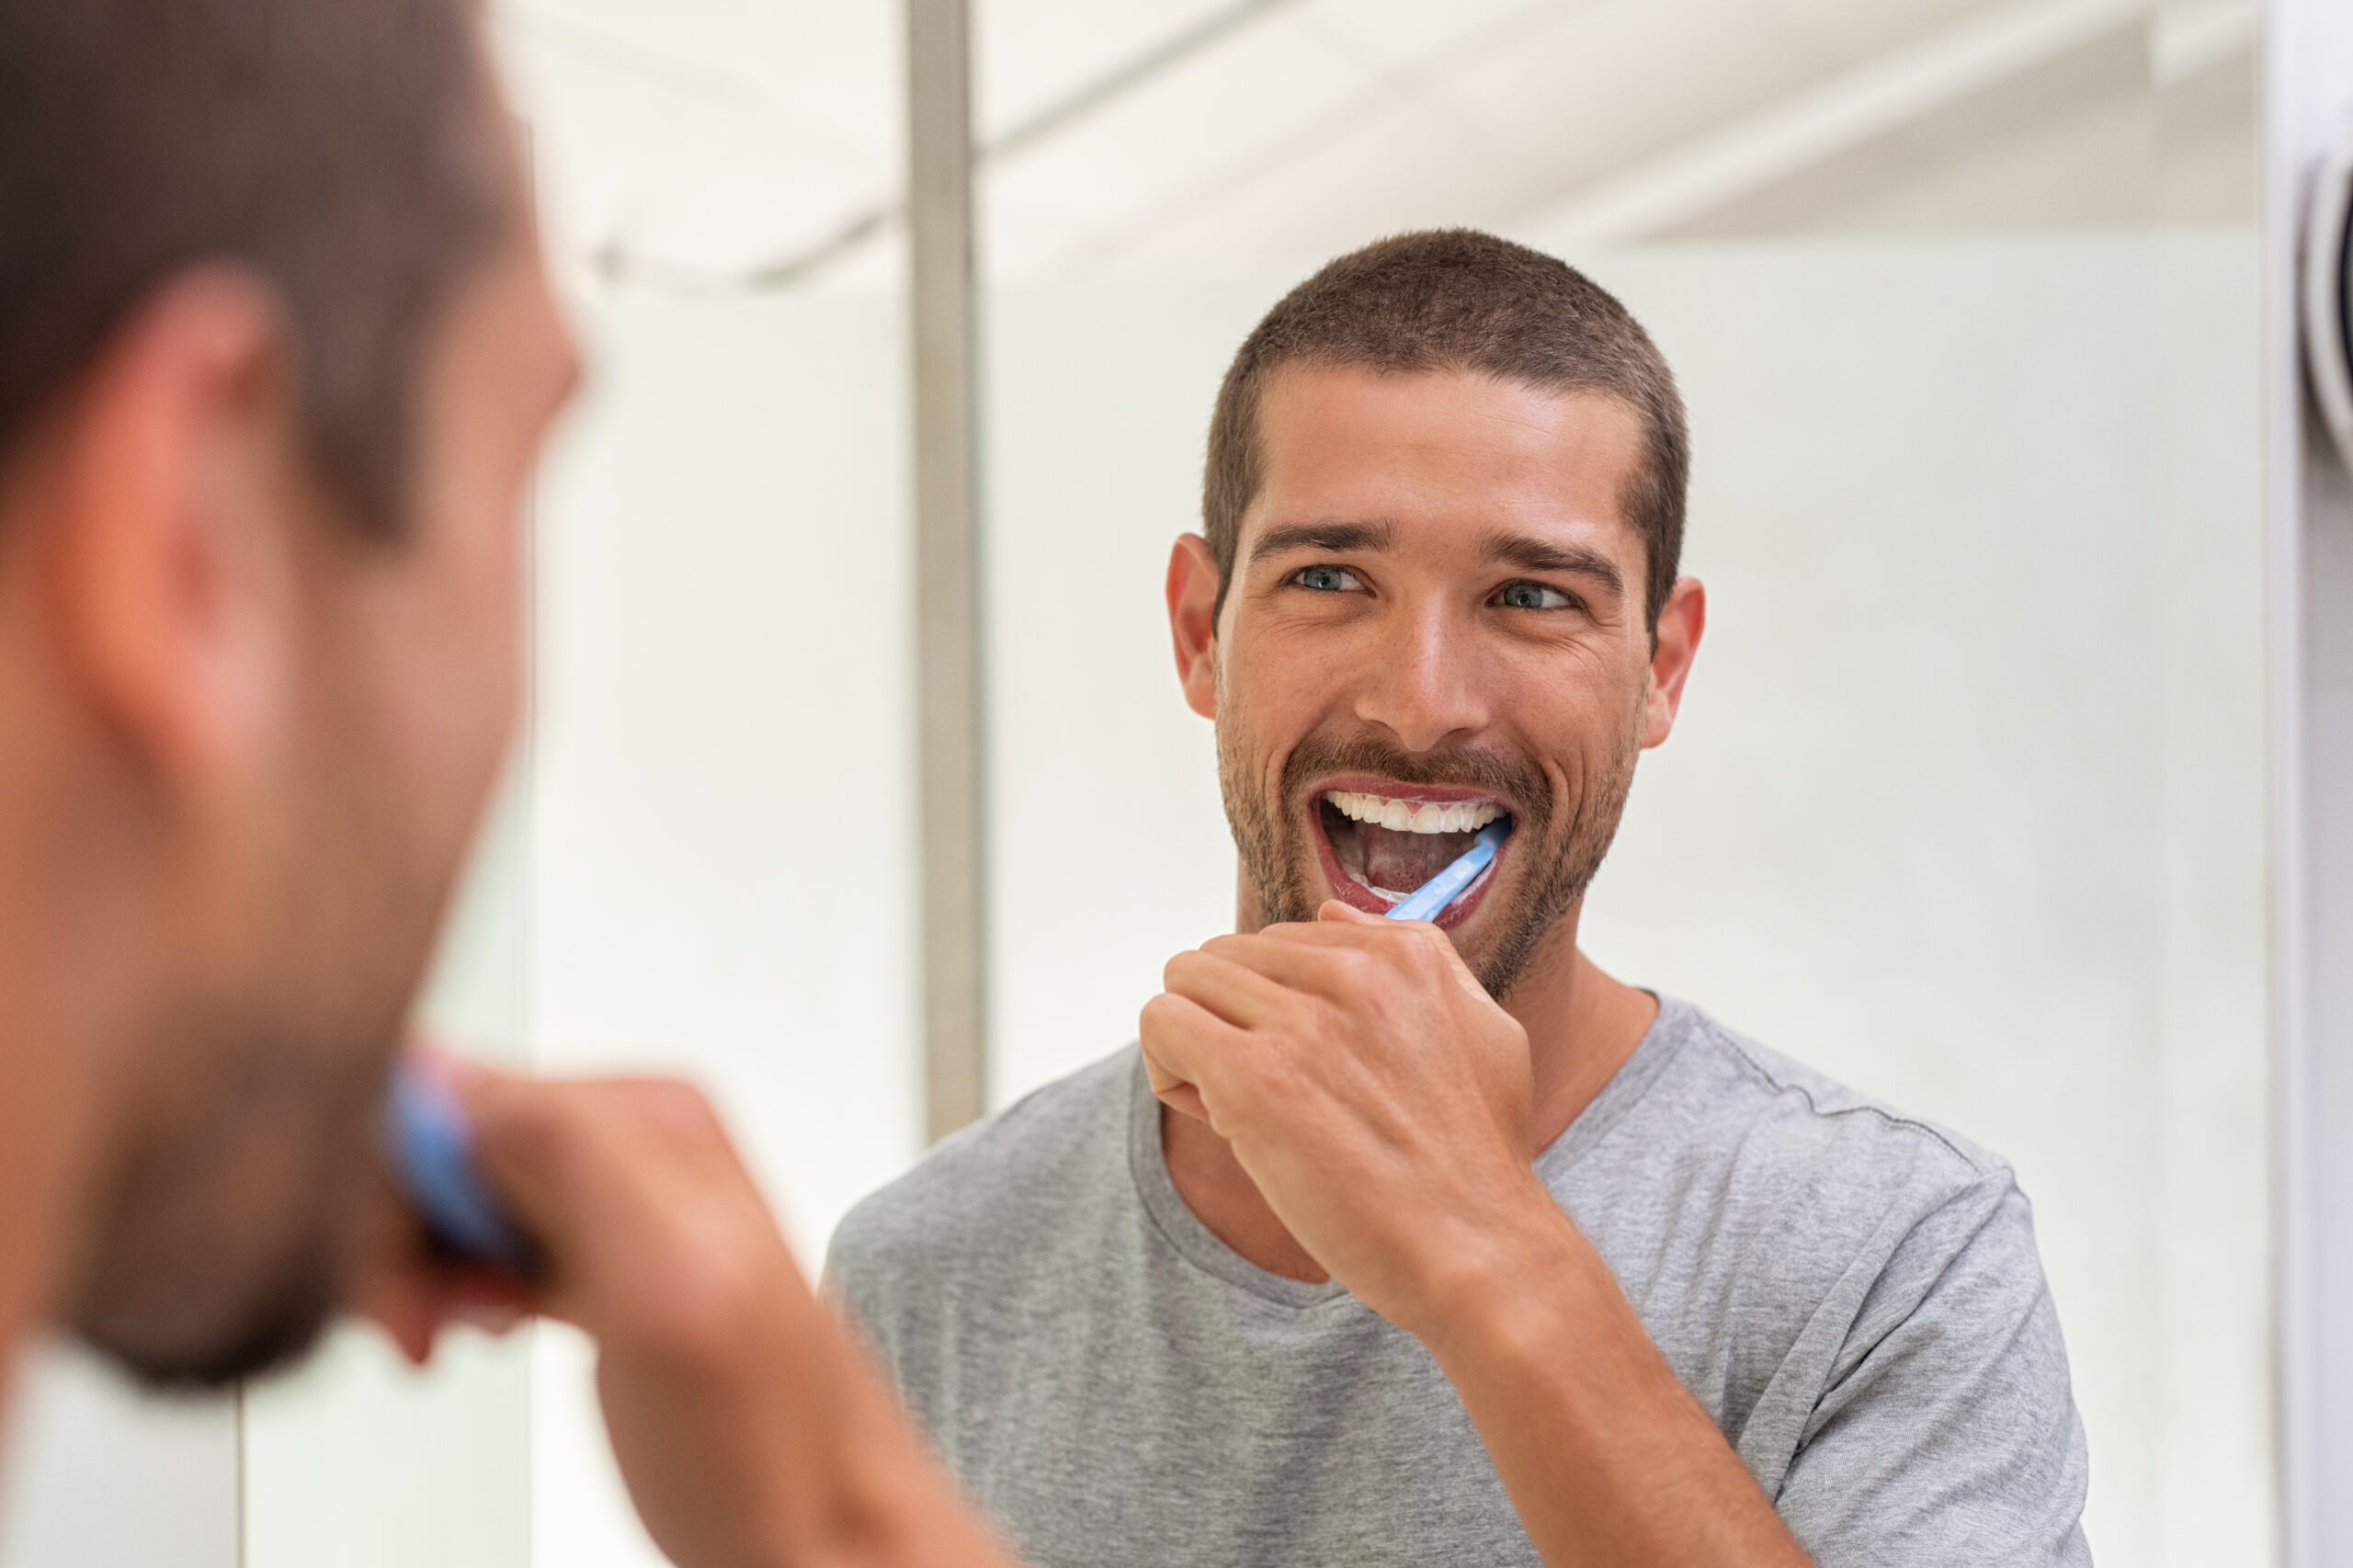 Toothpaste and Oral Care for Sensitive Teeth